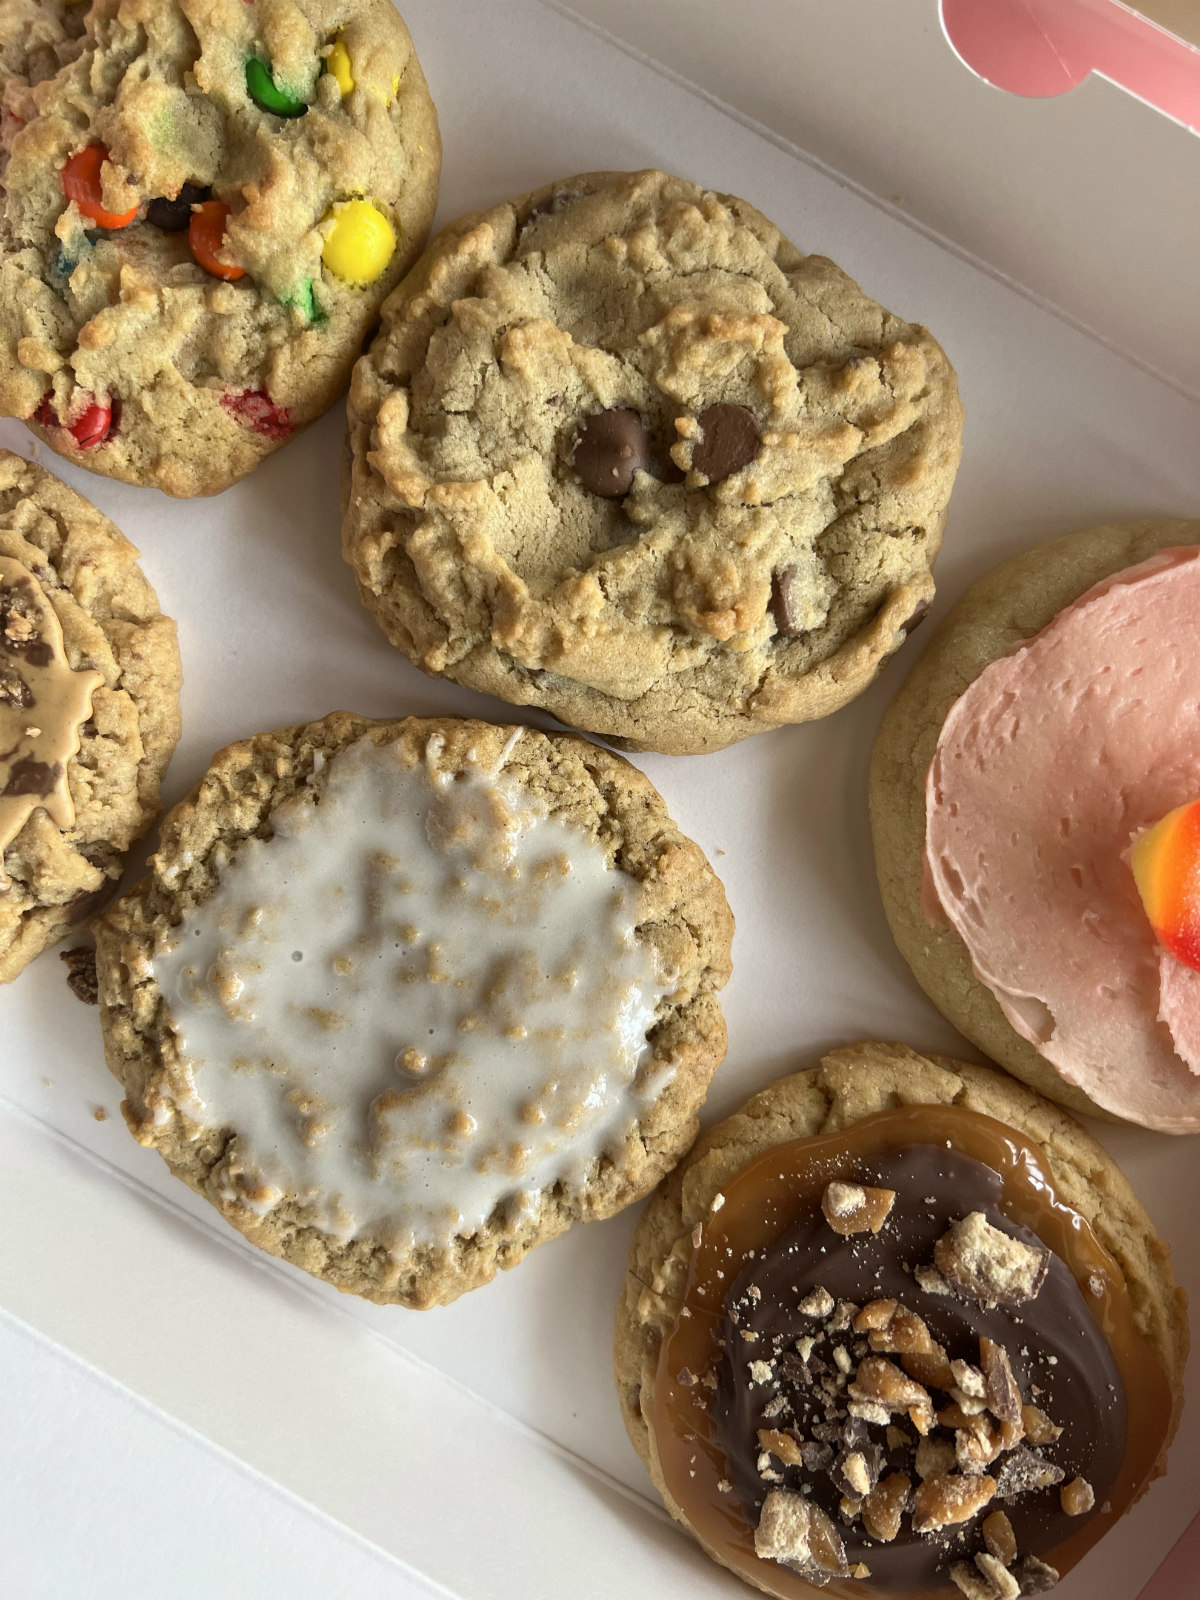 Review West Omaha’s popular Crumbl Cookies are worth the hype Sarah